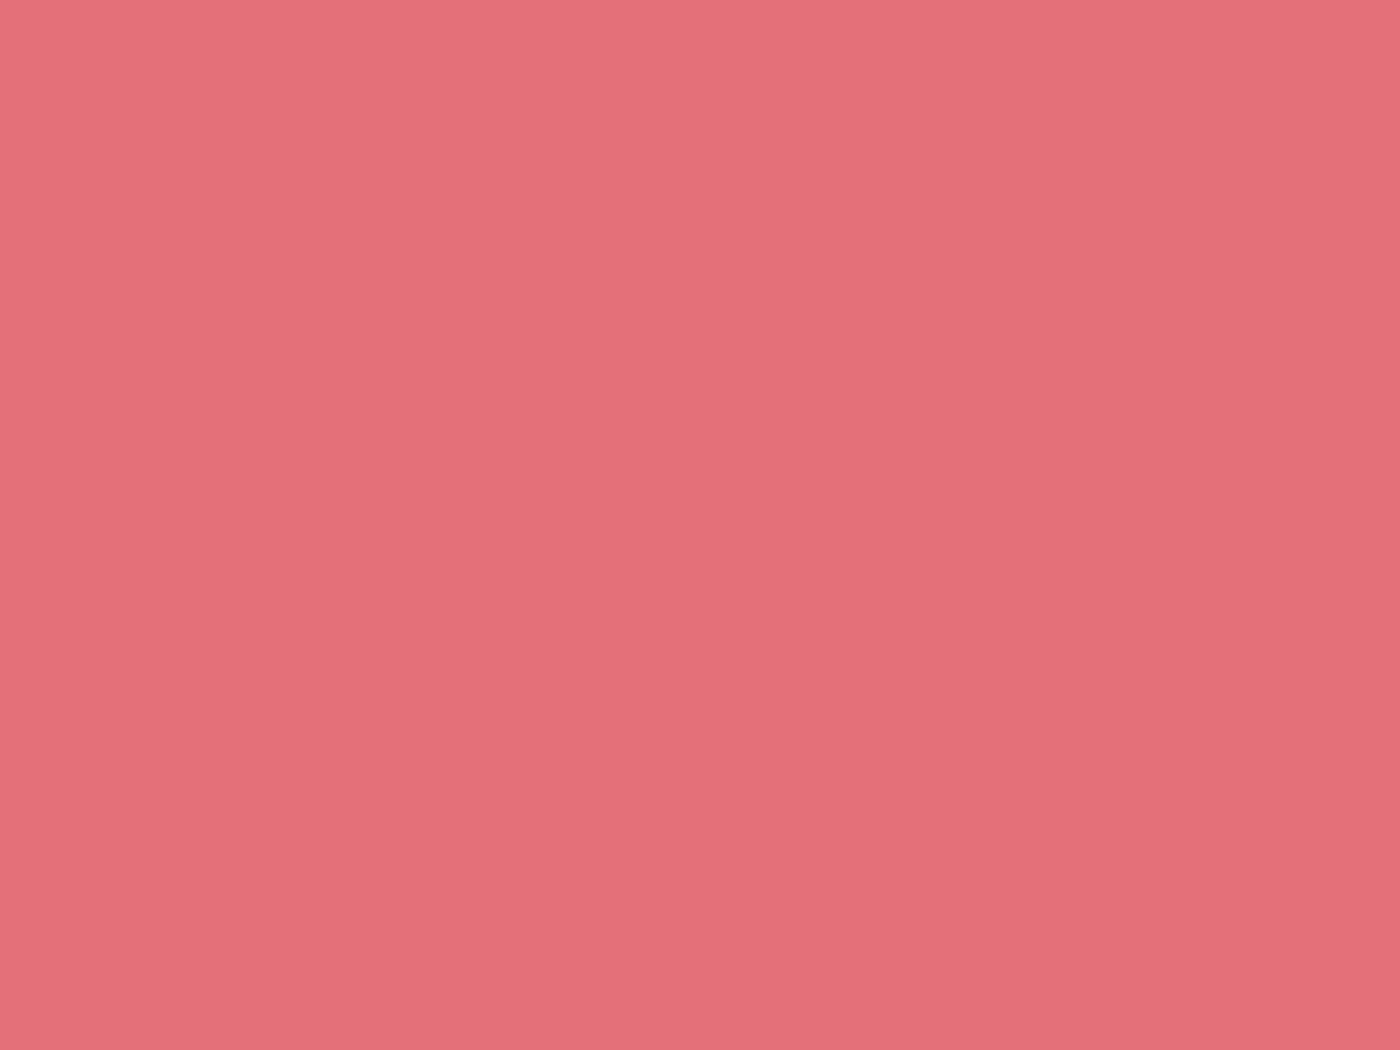 1400x1050 Candy Pink Solid Color Background